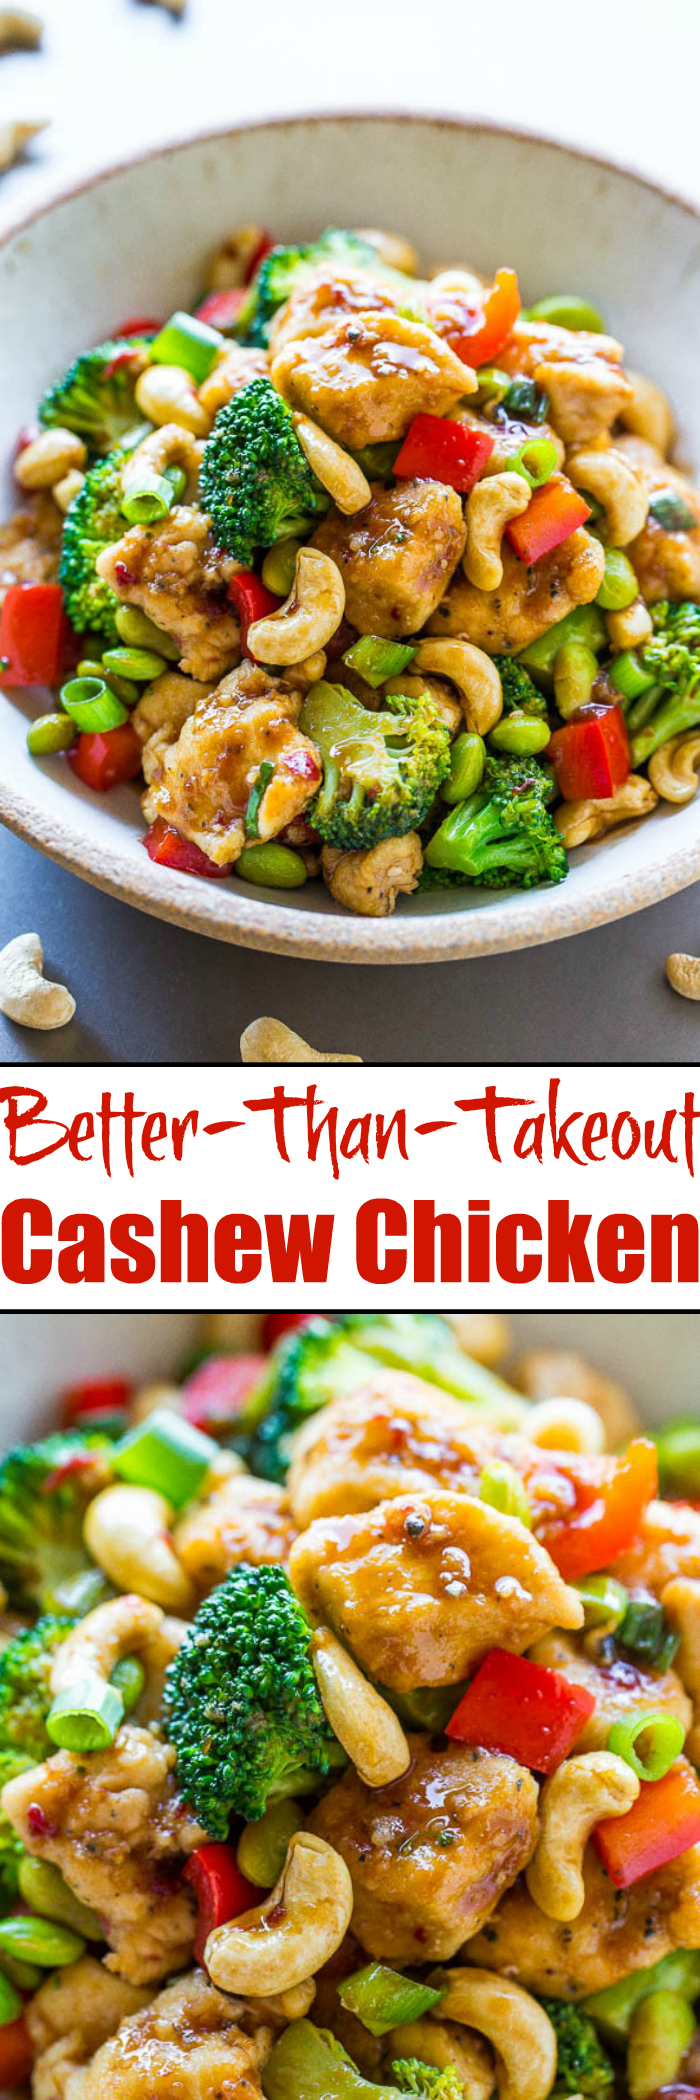 20-Minute Cashew Chicken {Better than Takeout!} - Averie Cooks